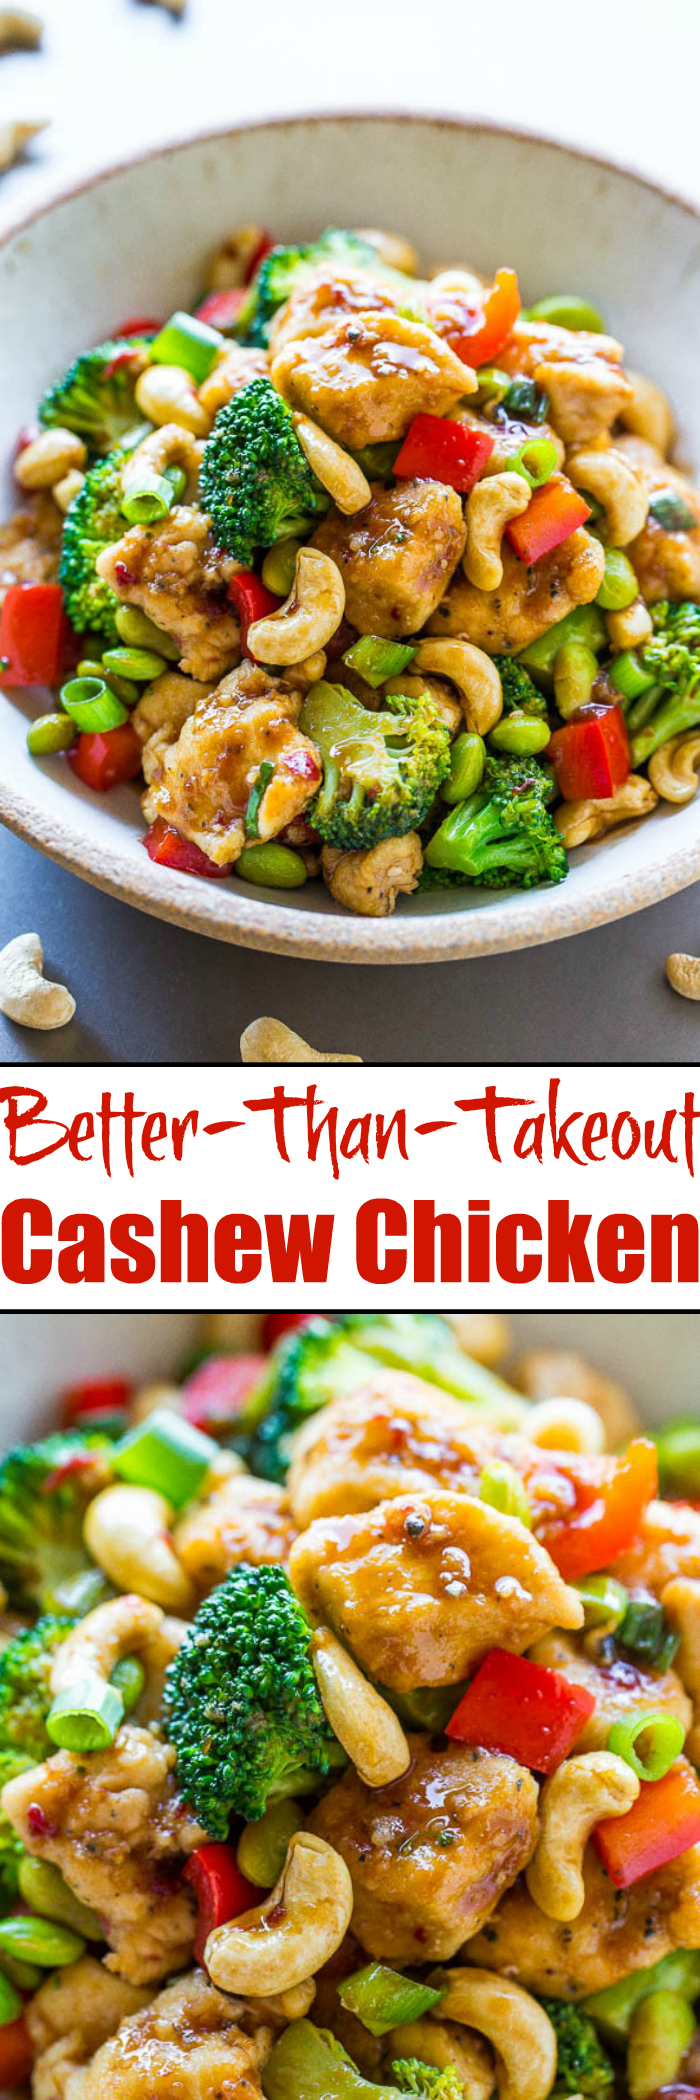 20-Minute Cashew Chicken {Better than Takeout!} - Averie Cooks